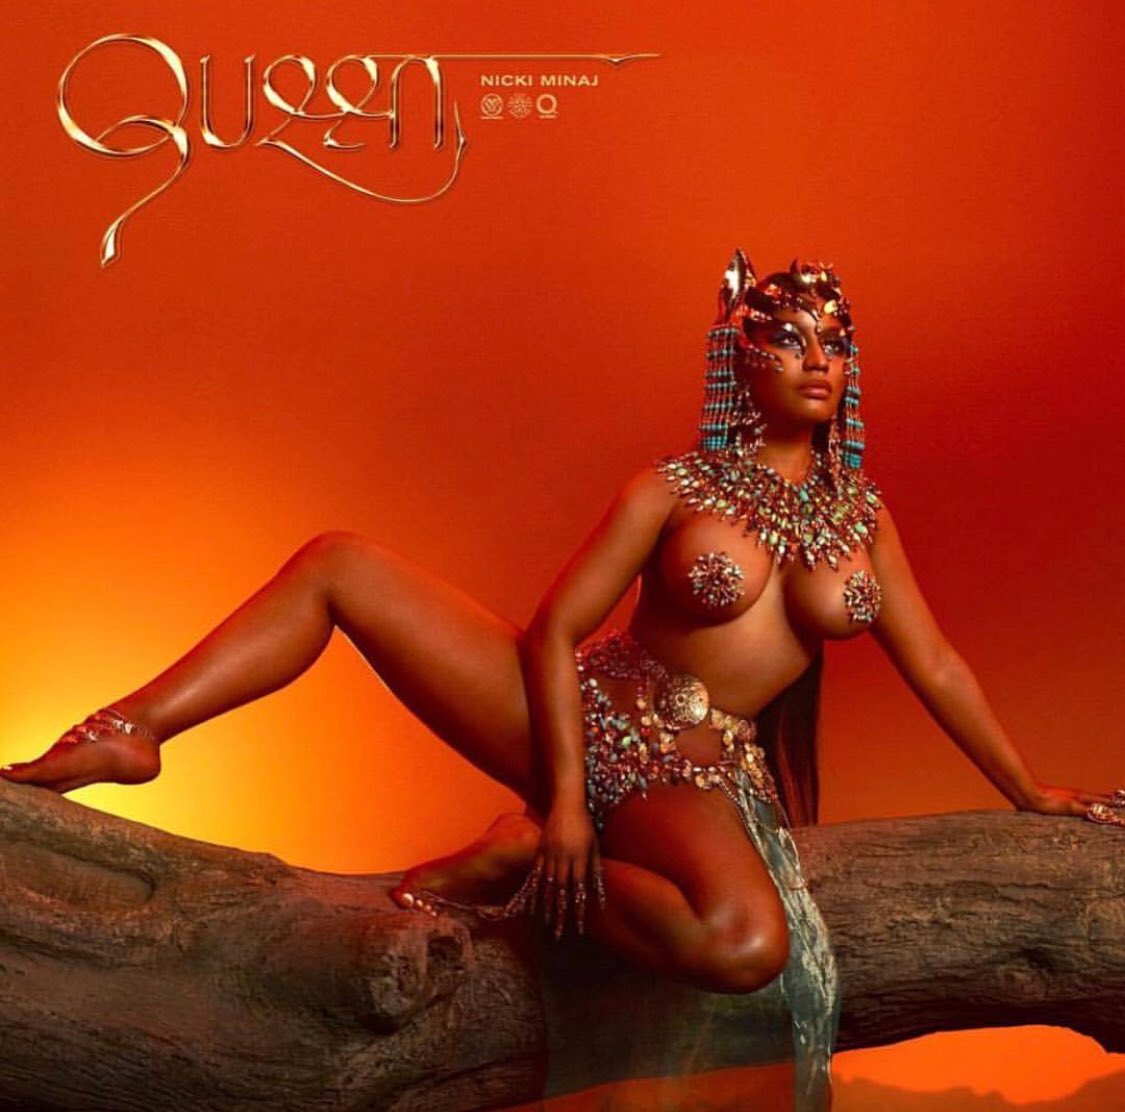 Nicki Minaj's Latest Album 'Queen' Might Be Her Best Work So Far and Here's Why 2